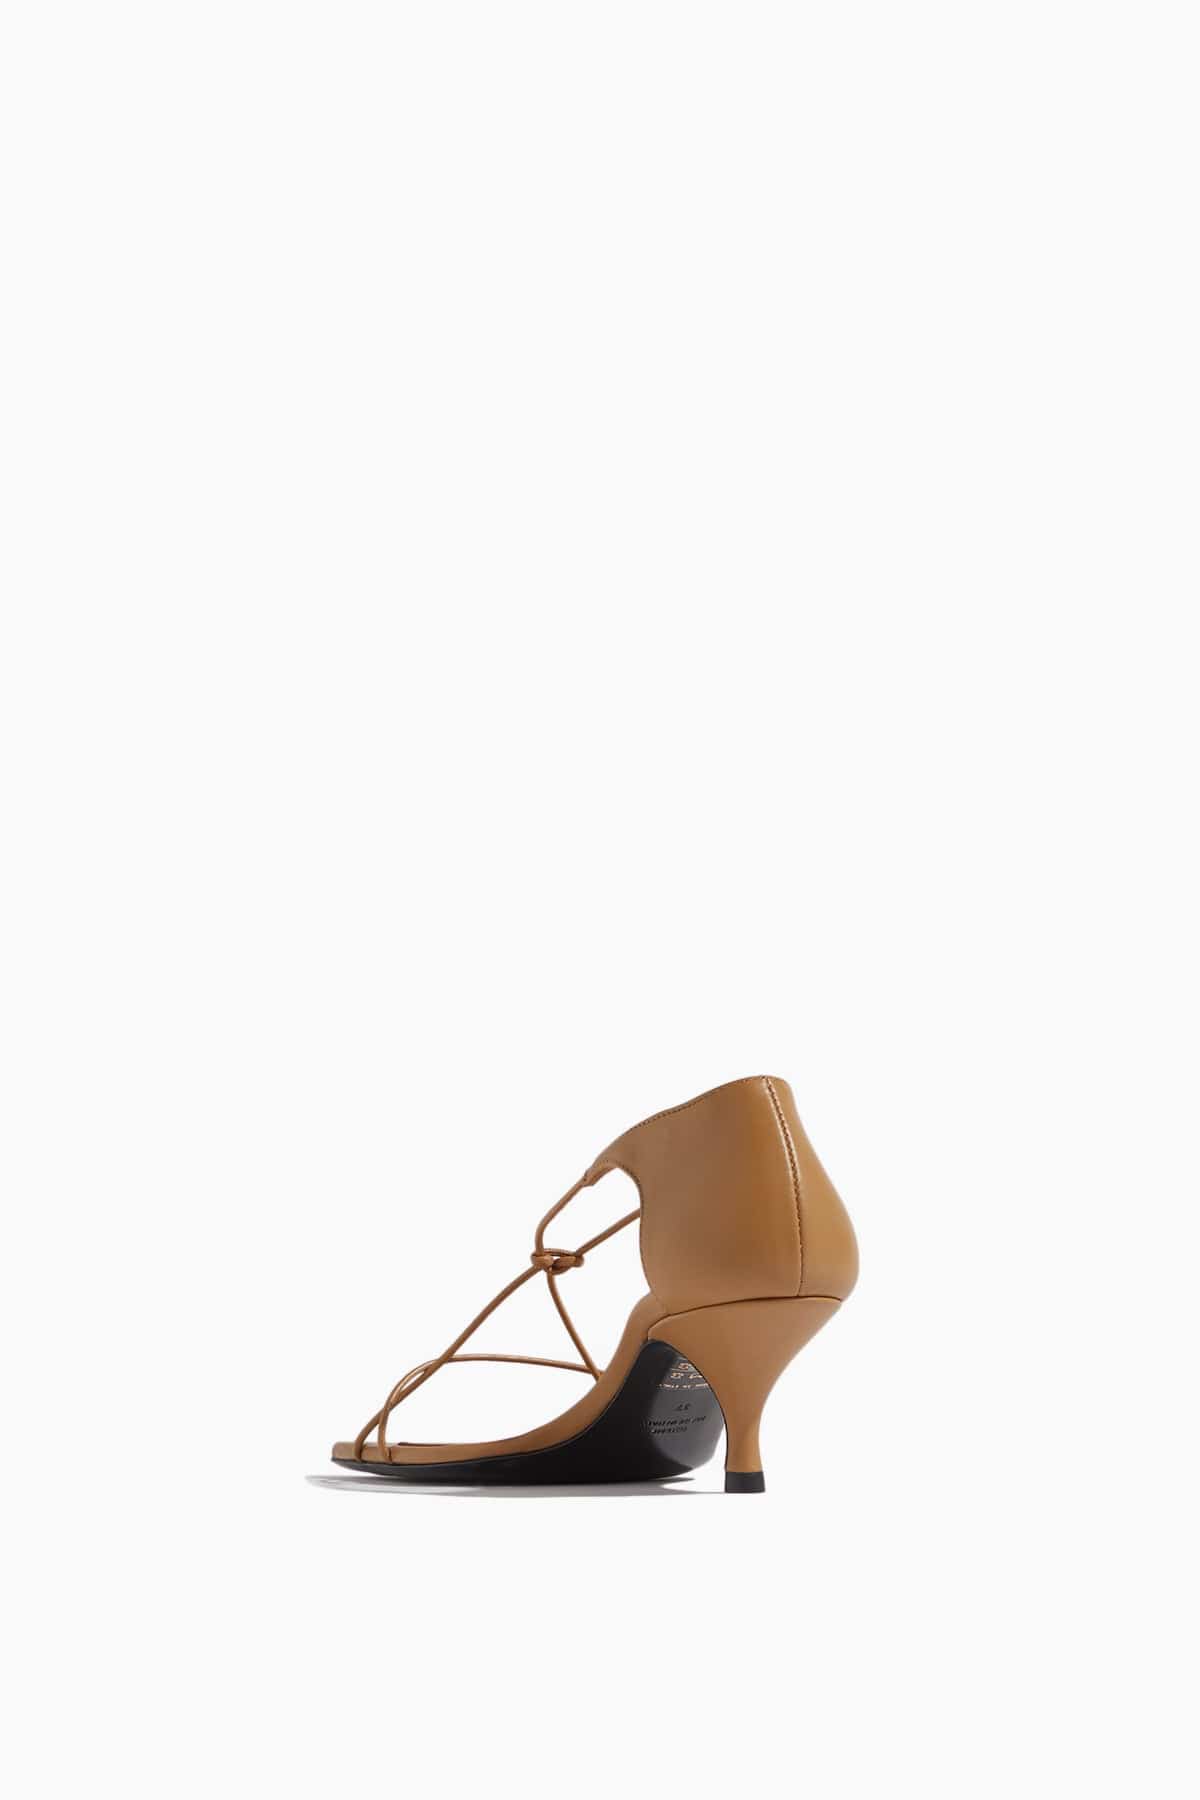 Toteme Strappy Heels Tie Knot Sandal in Caramel Toteme Tie Knot Sandal in Caramel